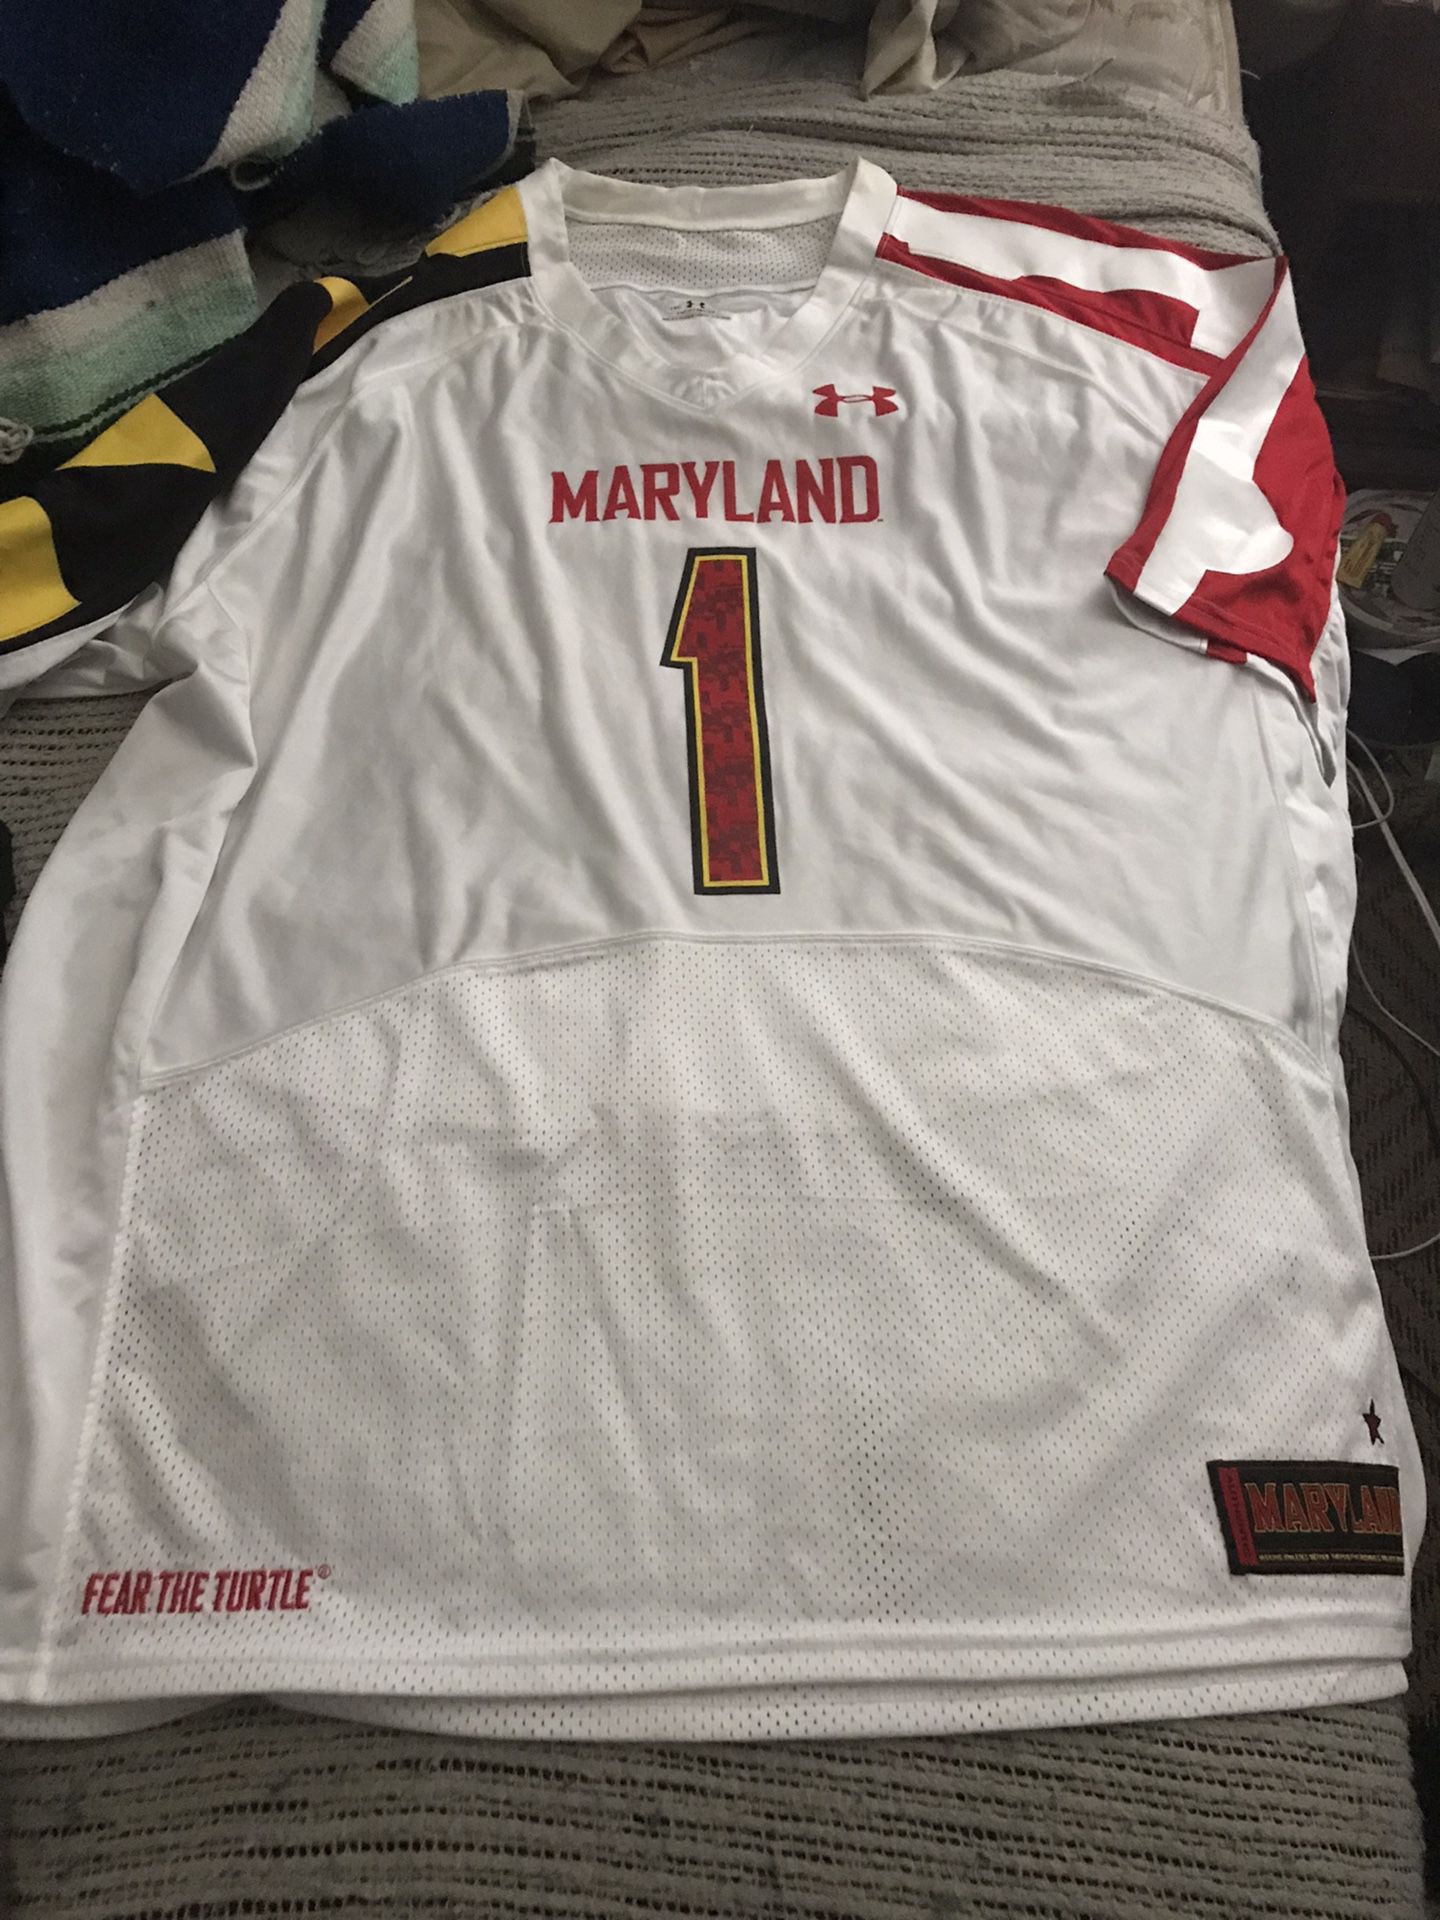 Collectors Fear The Turtle Maryland Jersey Only $50 Firm